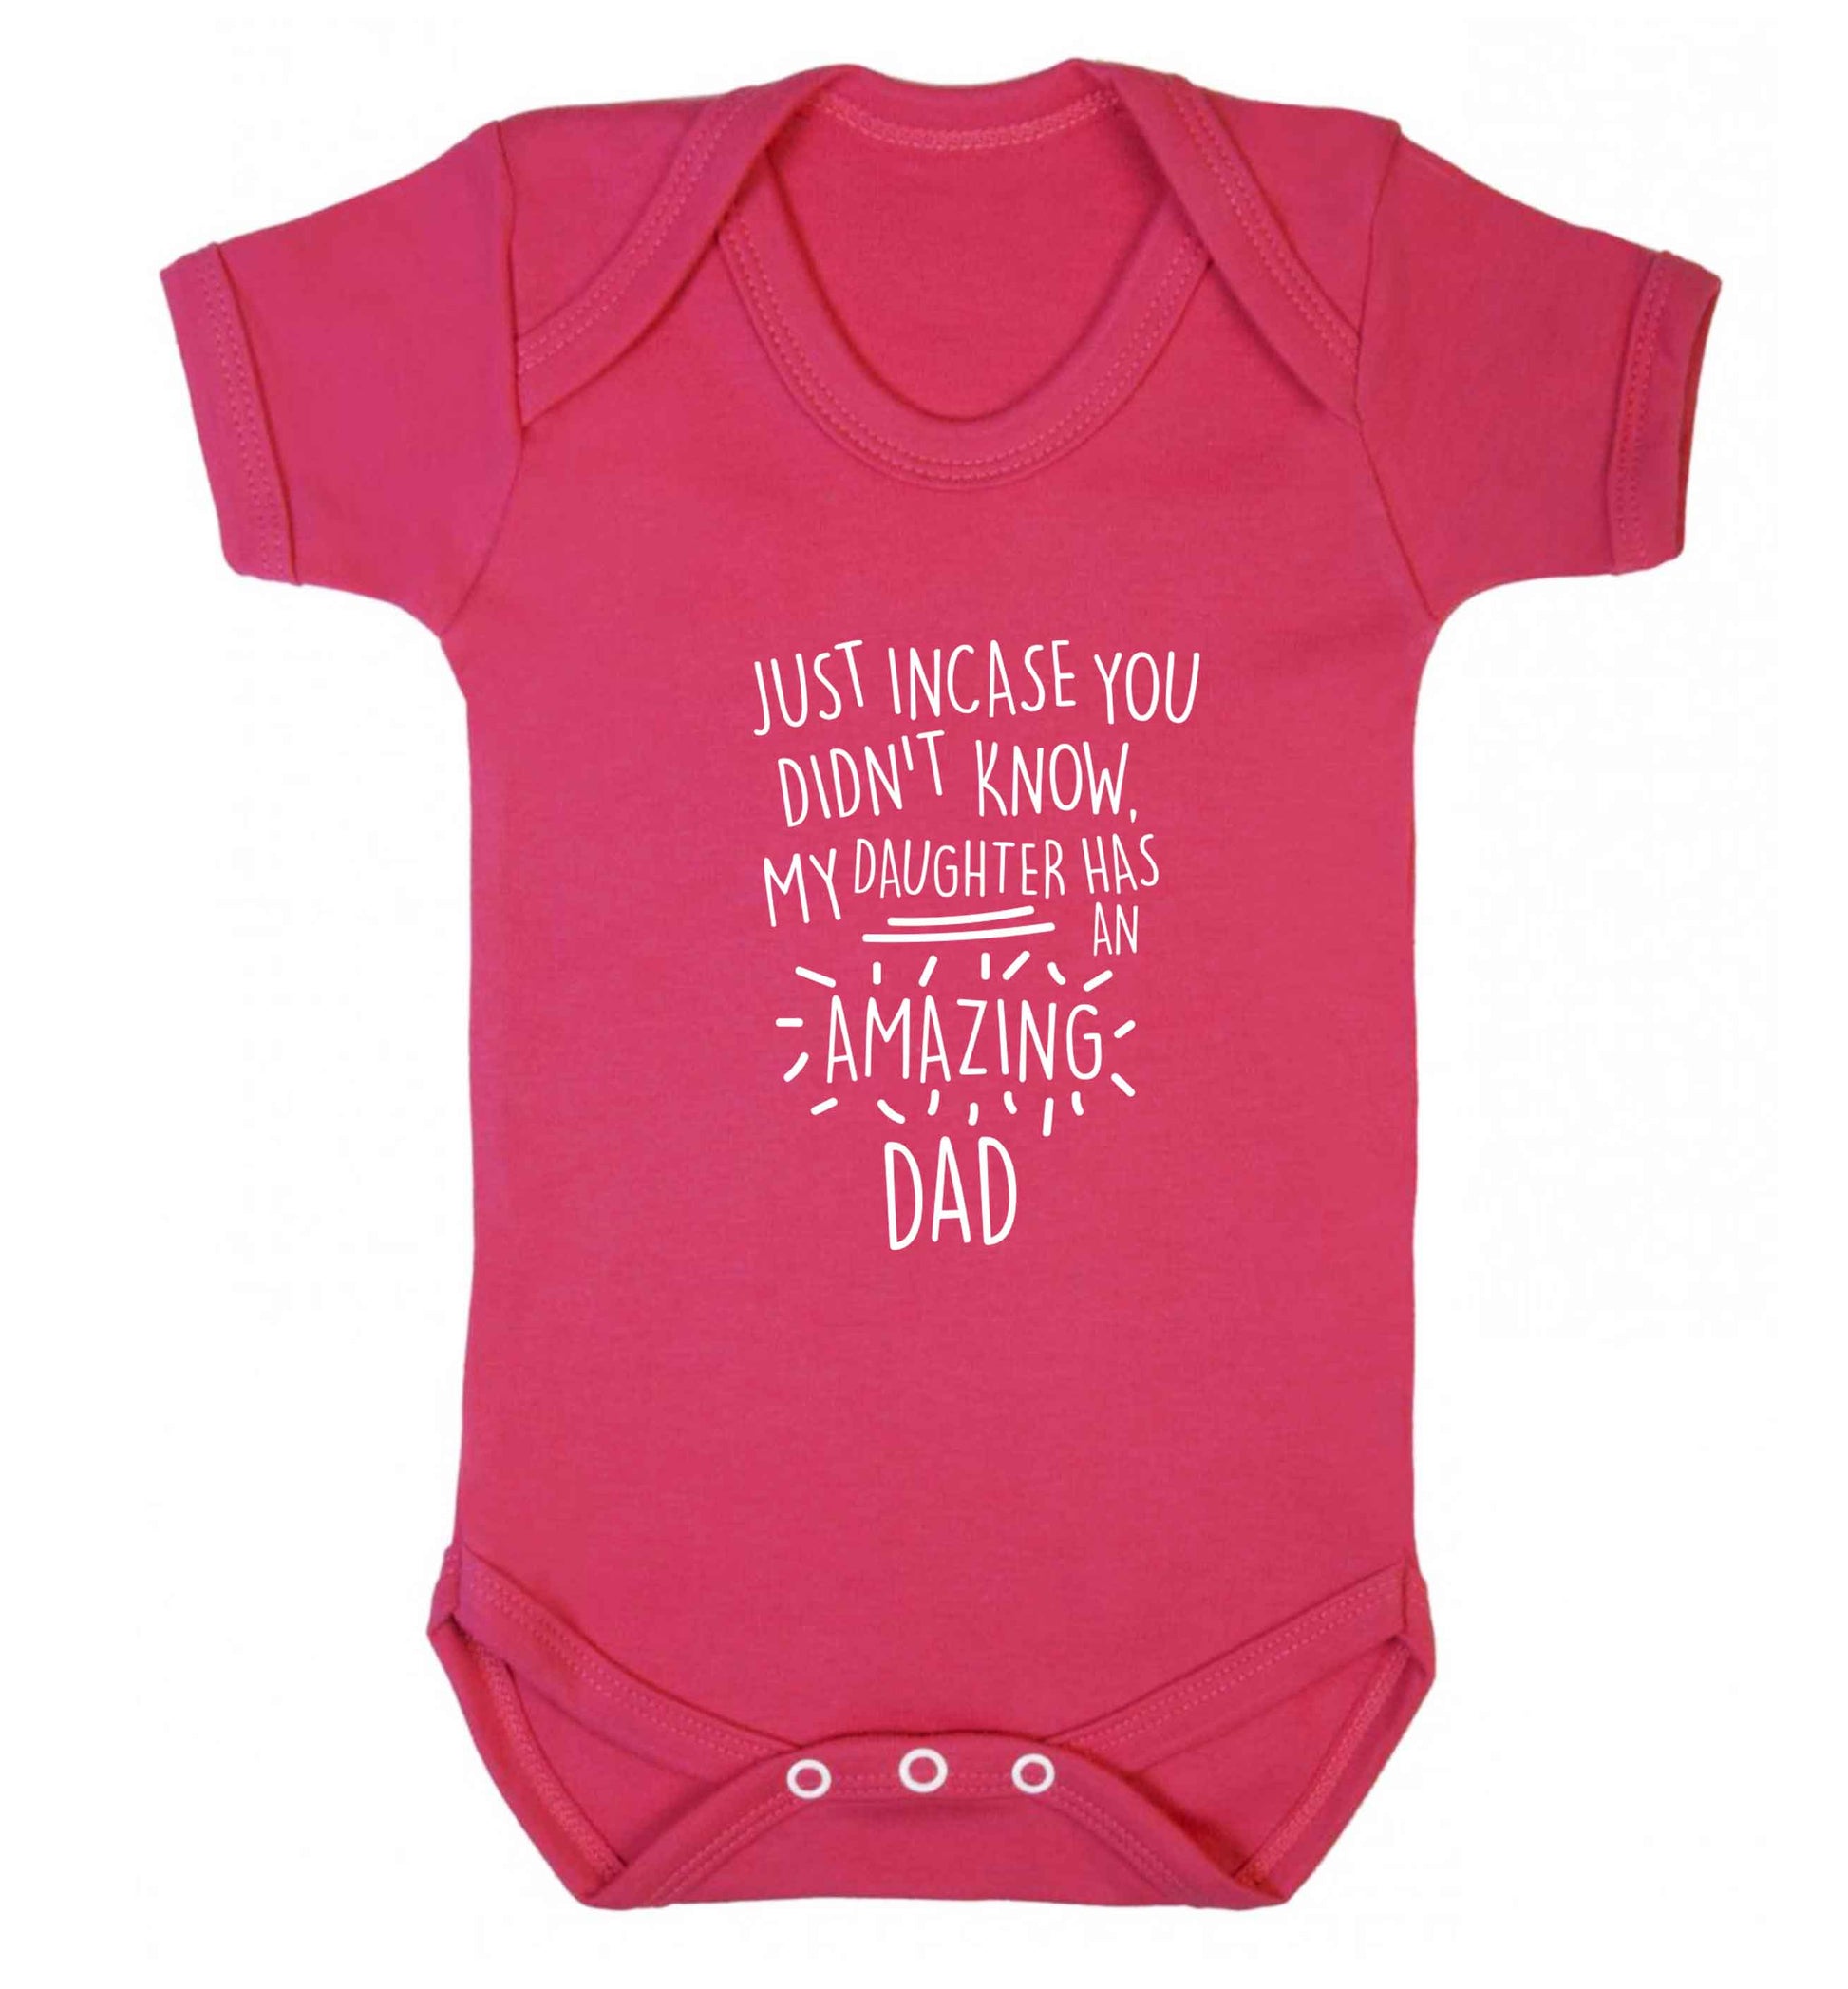 Just incase you didn't know my daughter has an amazing dad baby vest dark pink 18-24 months